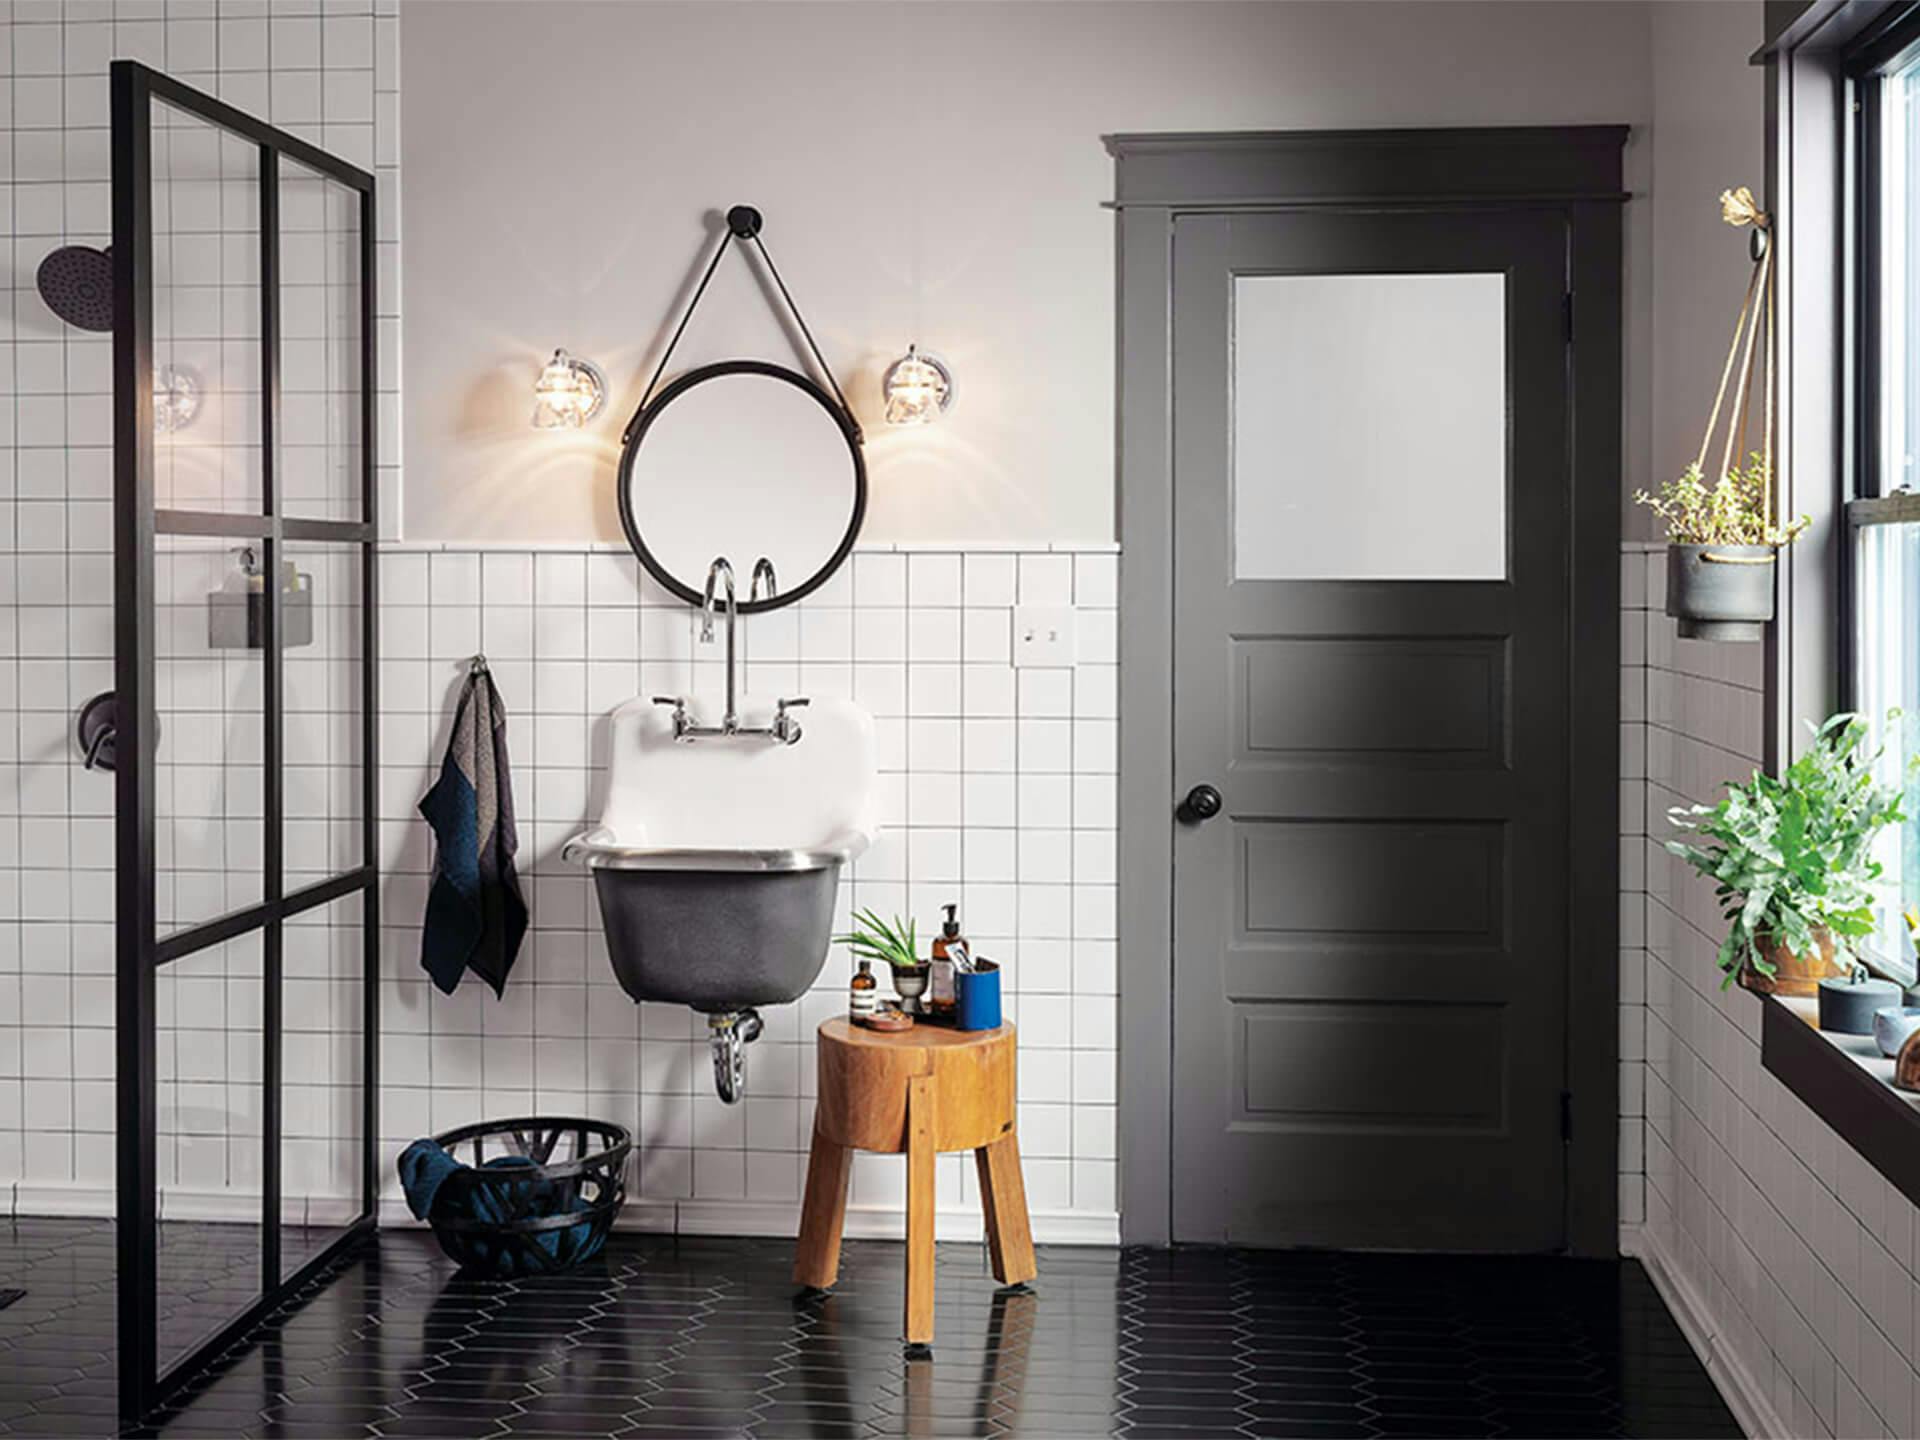 A modern bathroom with Talland vanity lights on either side of a mirror above an industrial bathroom sink turned on during the day